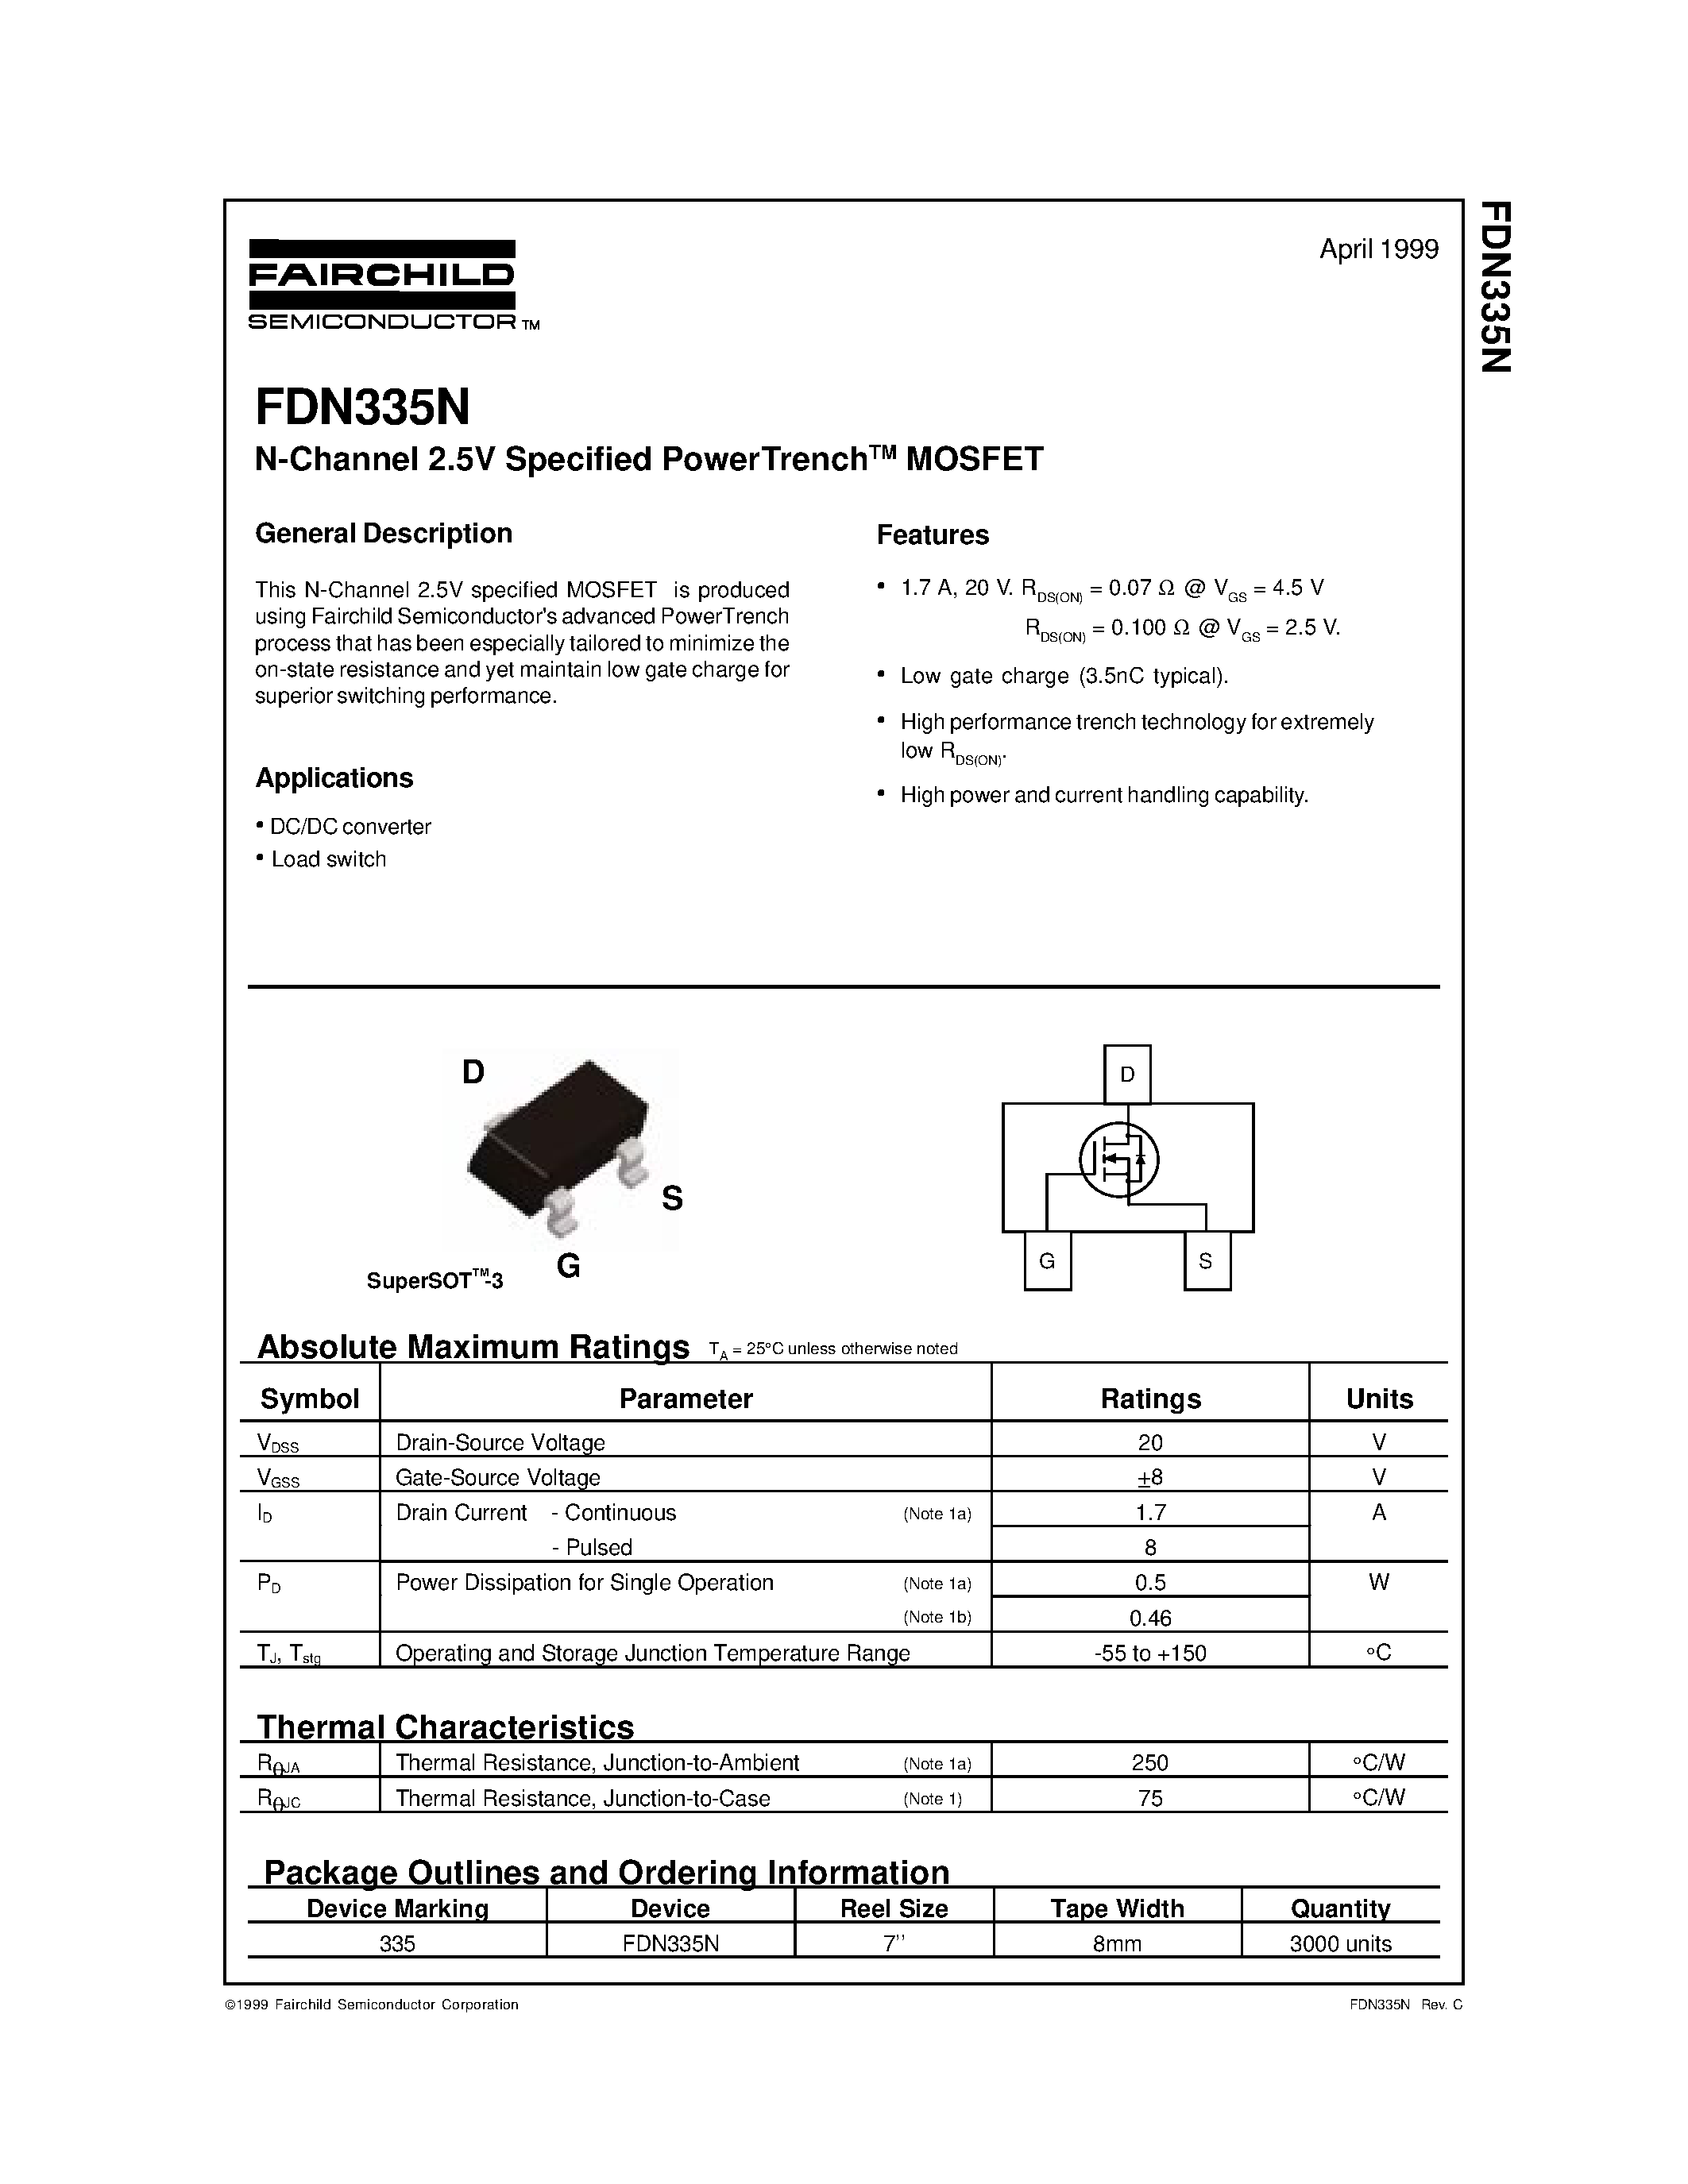 Даташит FDN335N-N-Channel 2.5V Specified PowerTrenchTM MOSFET страница 1